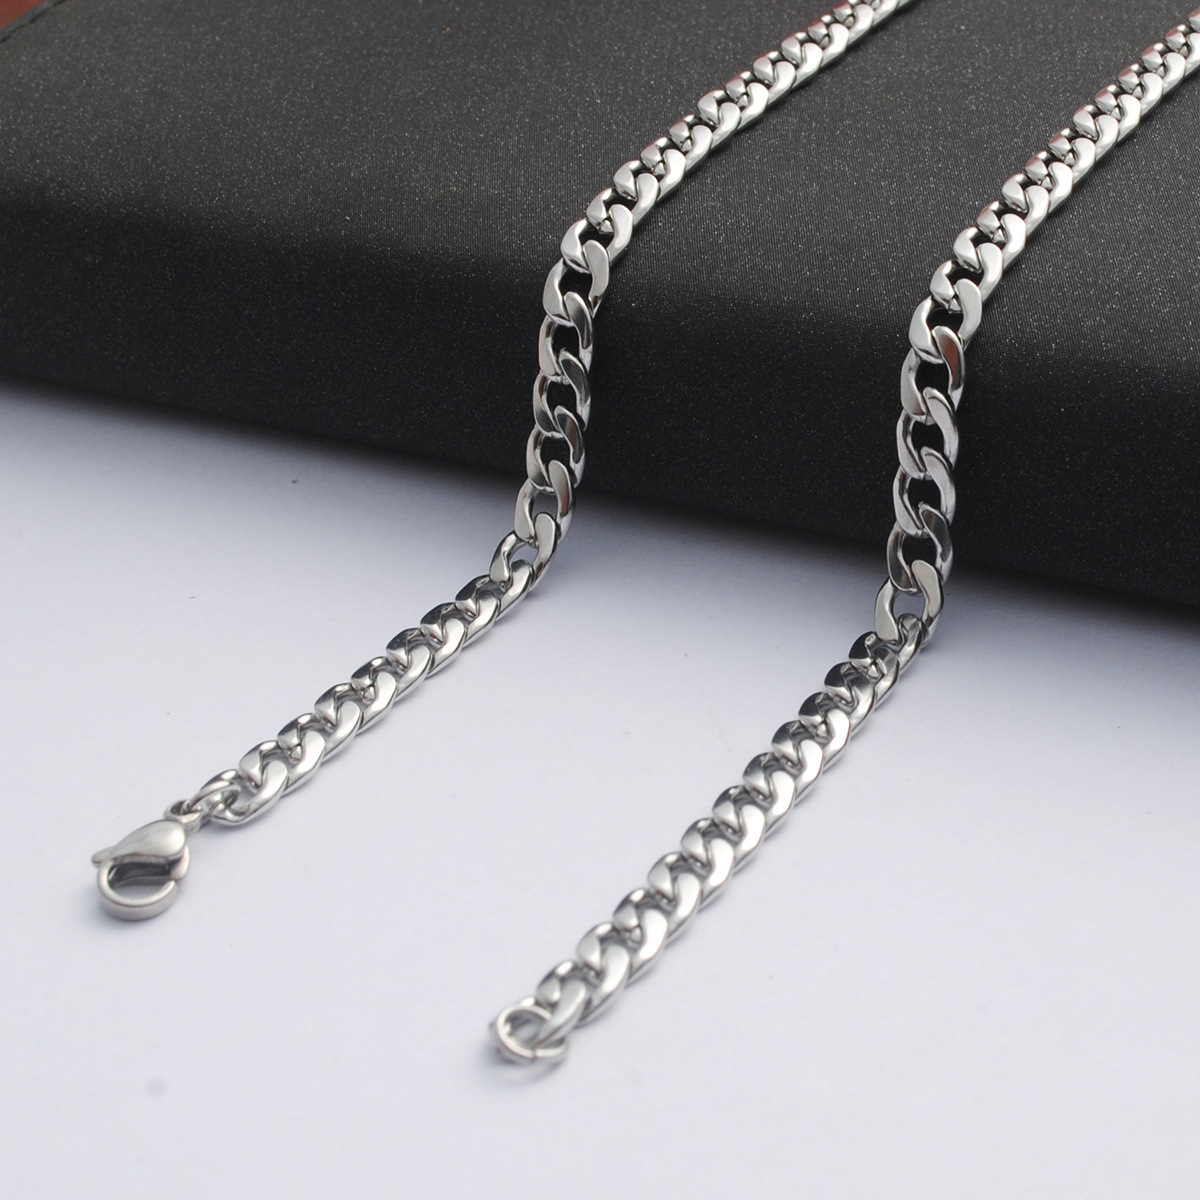 Stainless Steel Necklace for Men and Women Pendant Chain DIY Ornament Accessories Necklace Chain Single Necklace NK Chain Cuban Link Chain